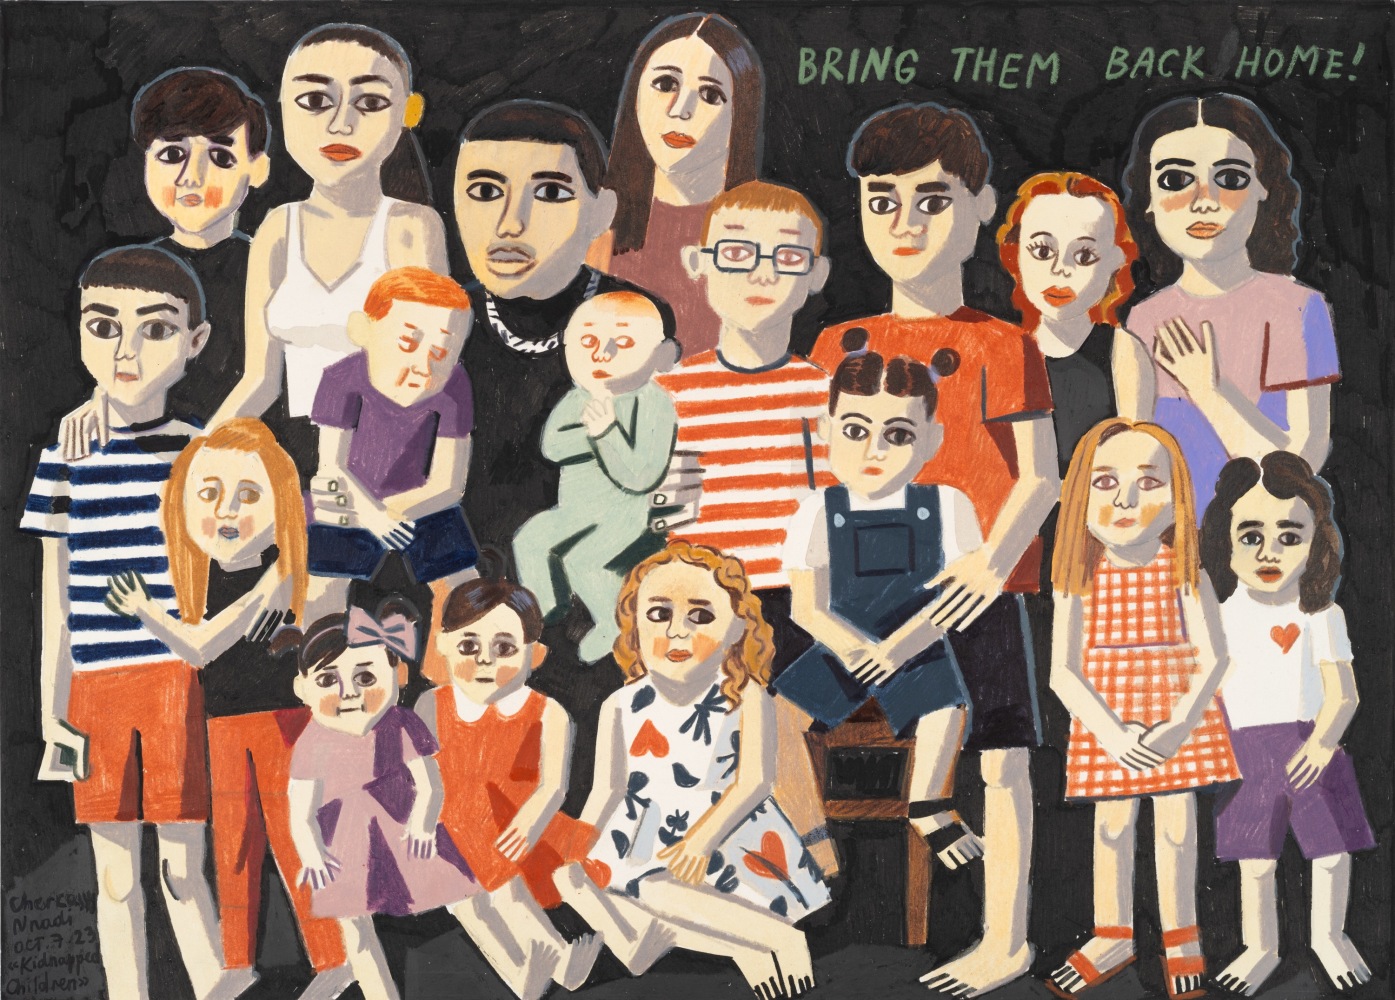 Bring Them Back Home, 2023
Watercolor, marker, colored pencil, and wax crayon paper
11.5 x 16 inches